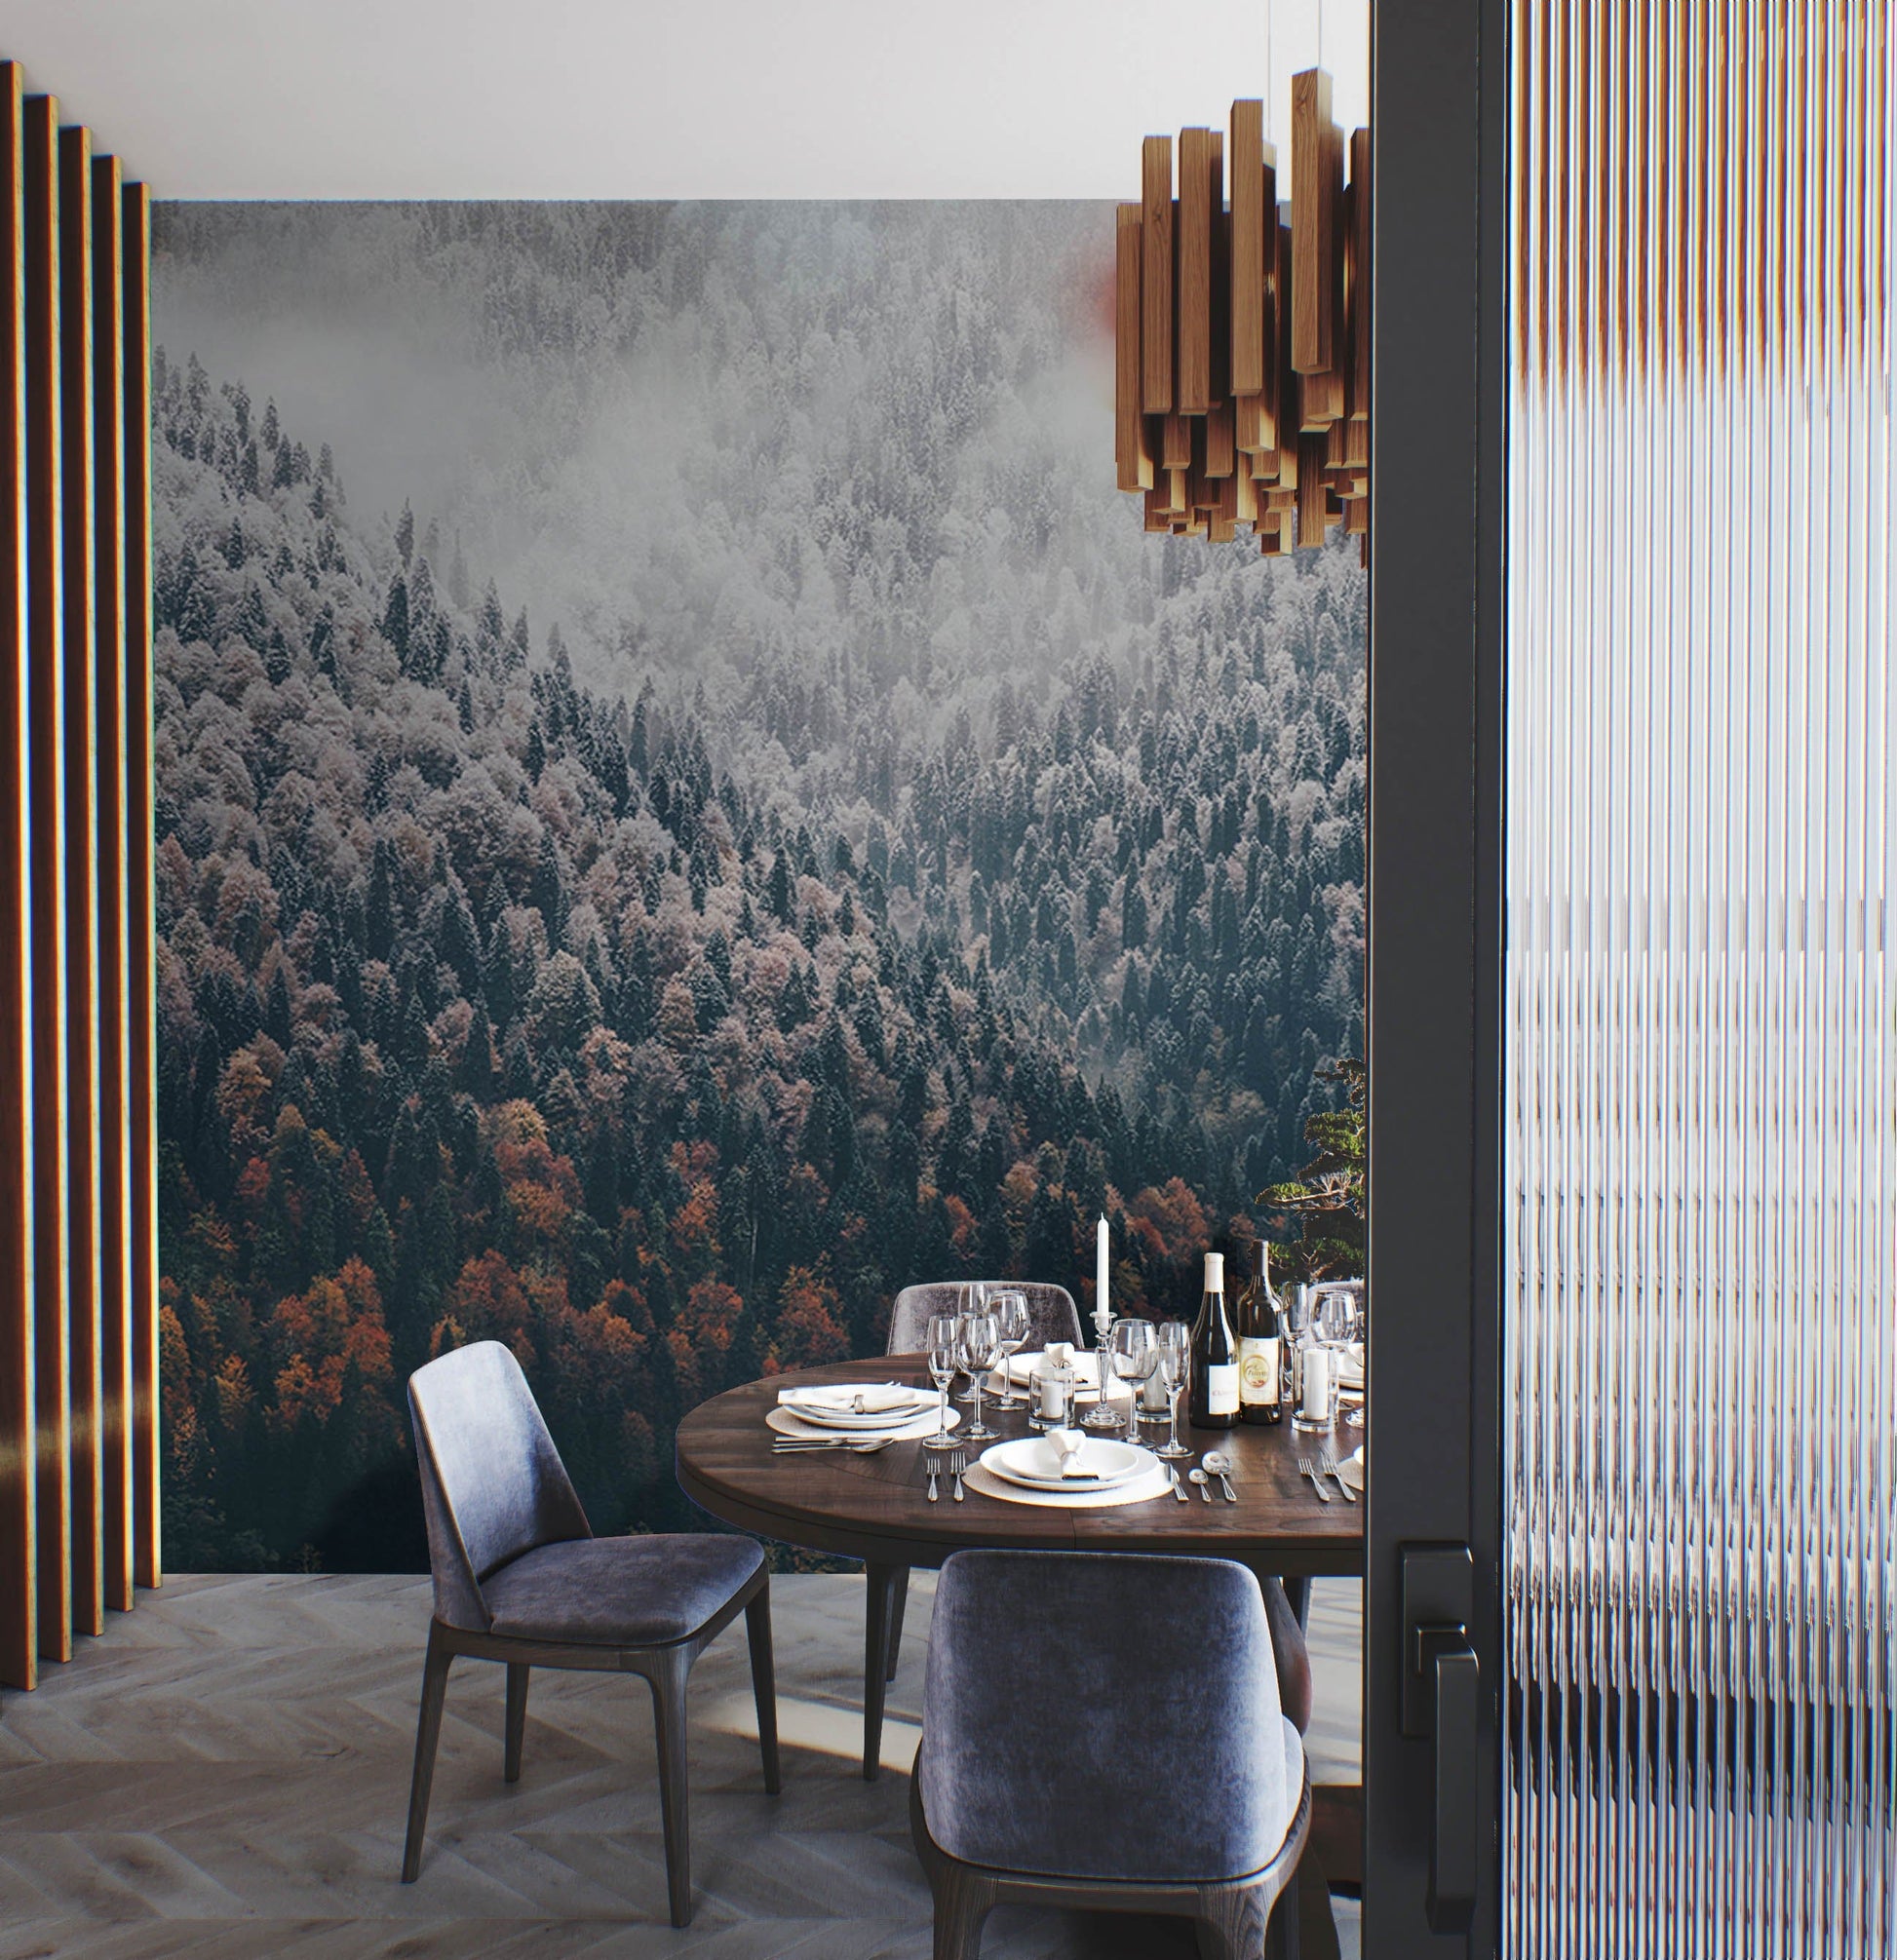 wallpaper mural featuring a misty pine forest to be used for the decoration of the dining room